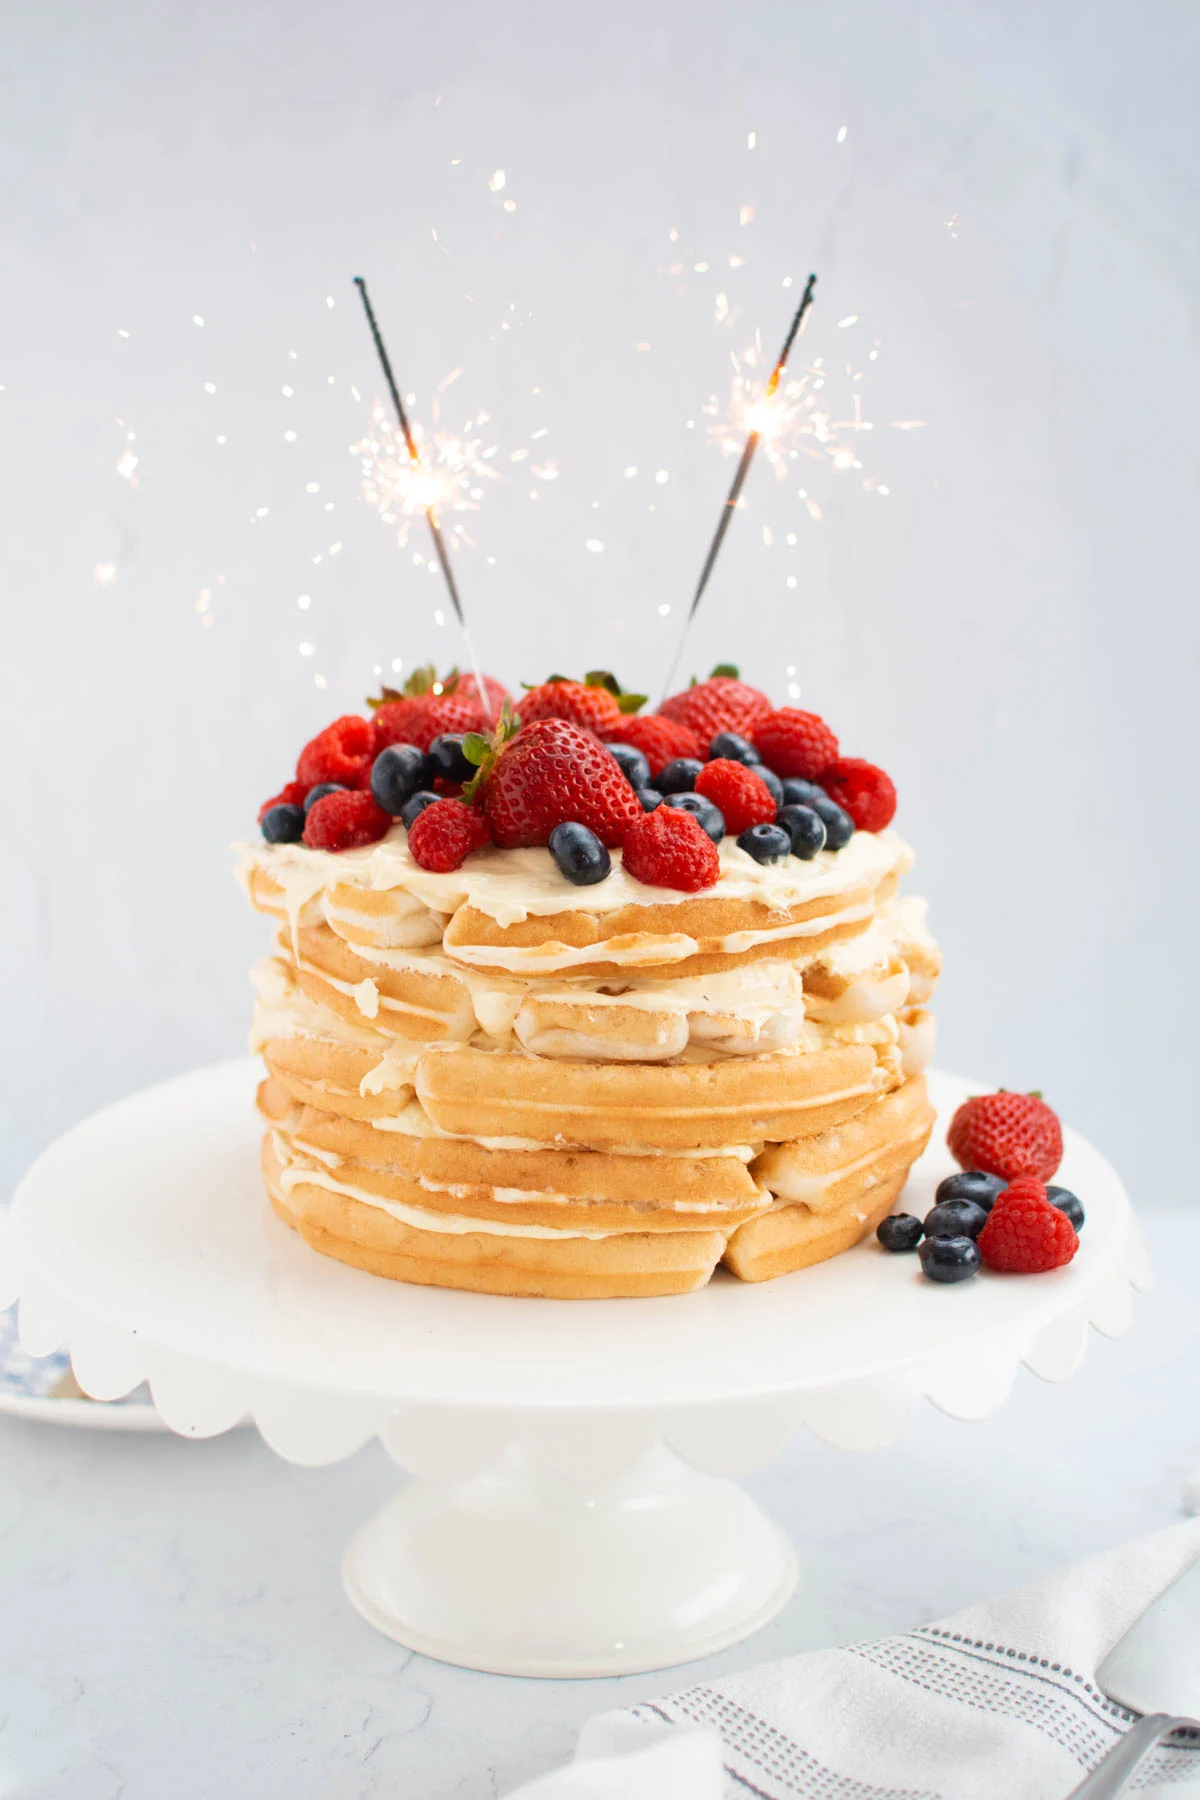 Patrotic berry waffle cake with pudding filling and sparklers on top.